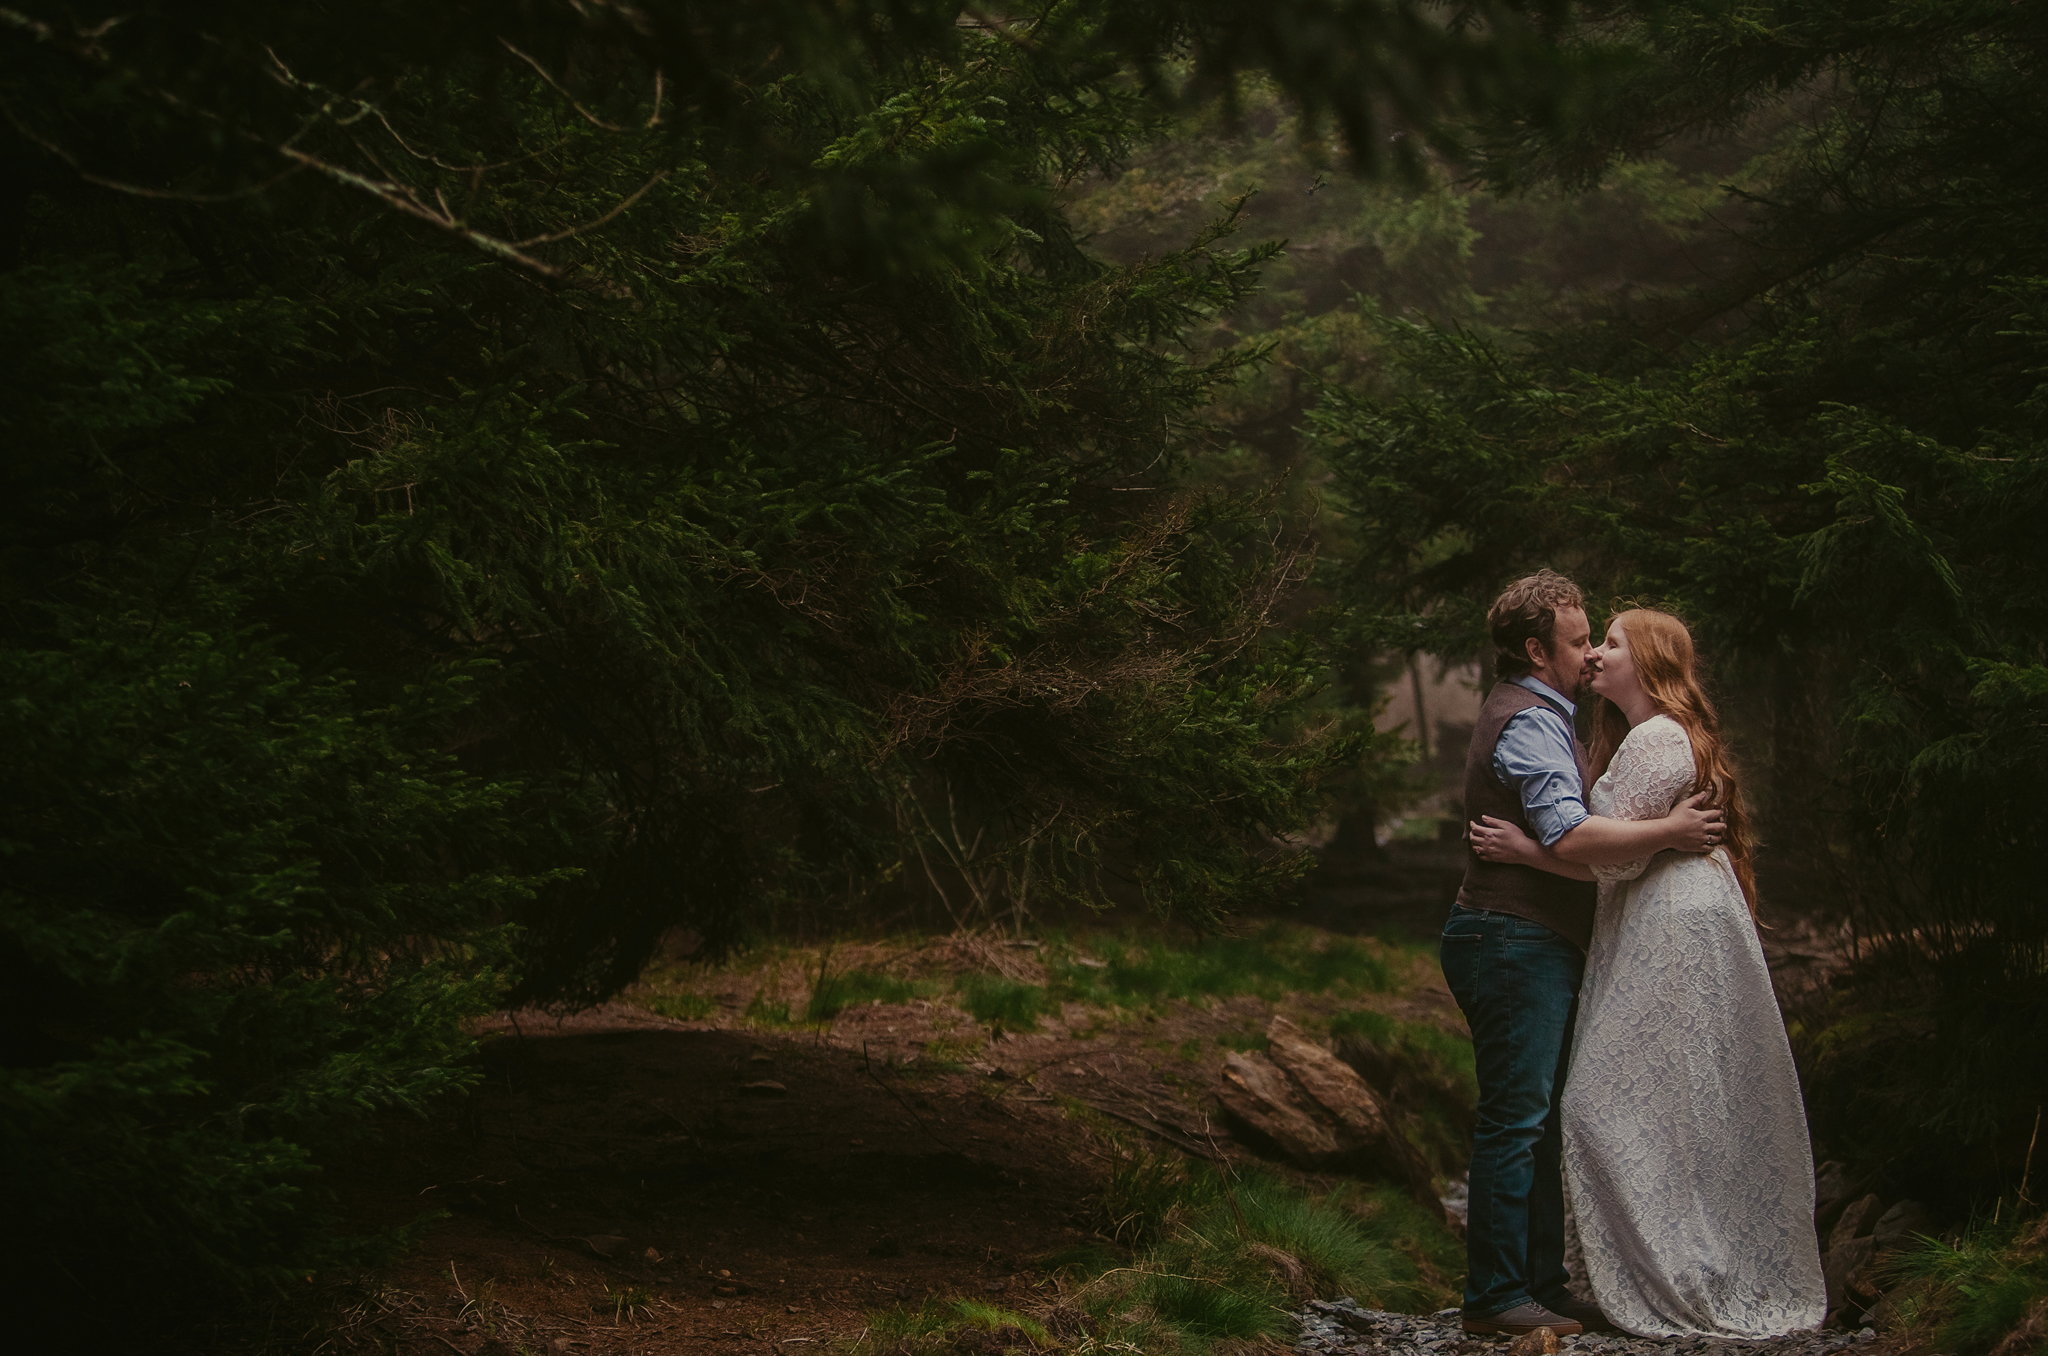 A misty engagement session at Black Balsam Knob in Asheville, NC